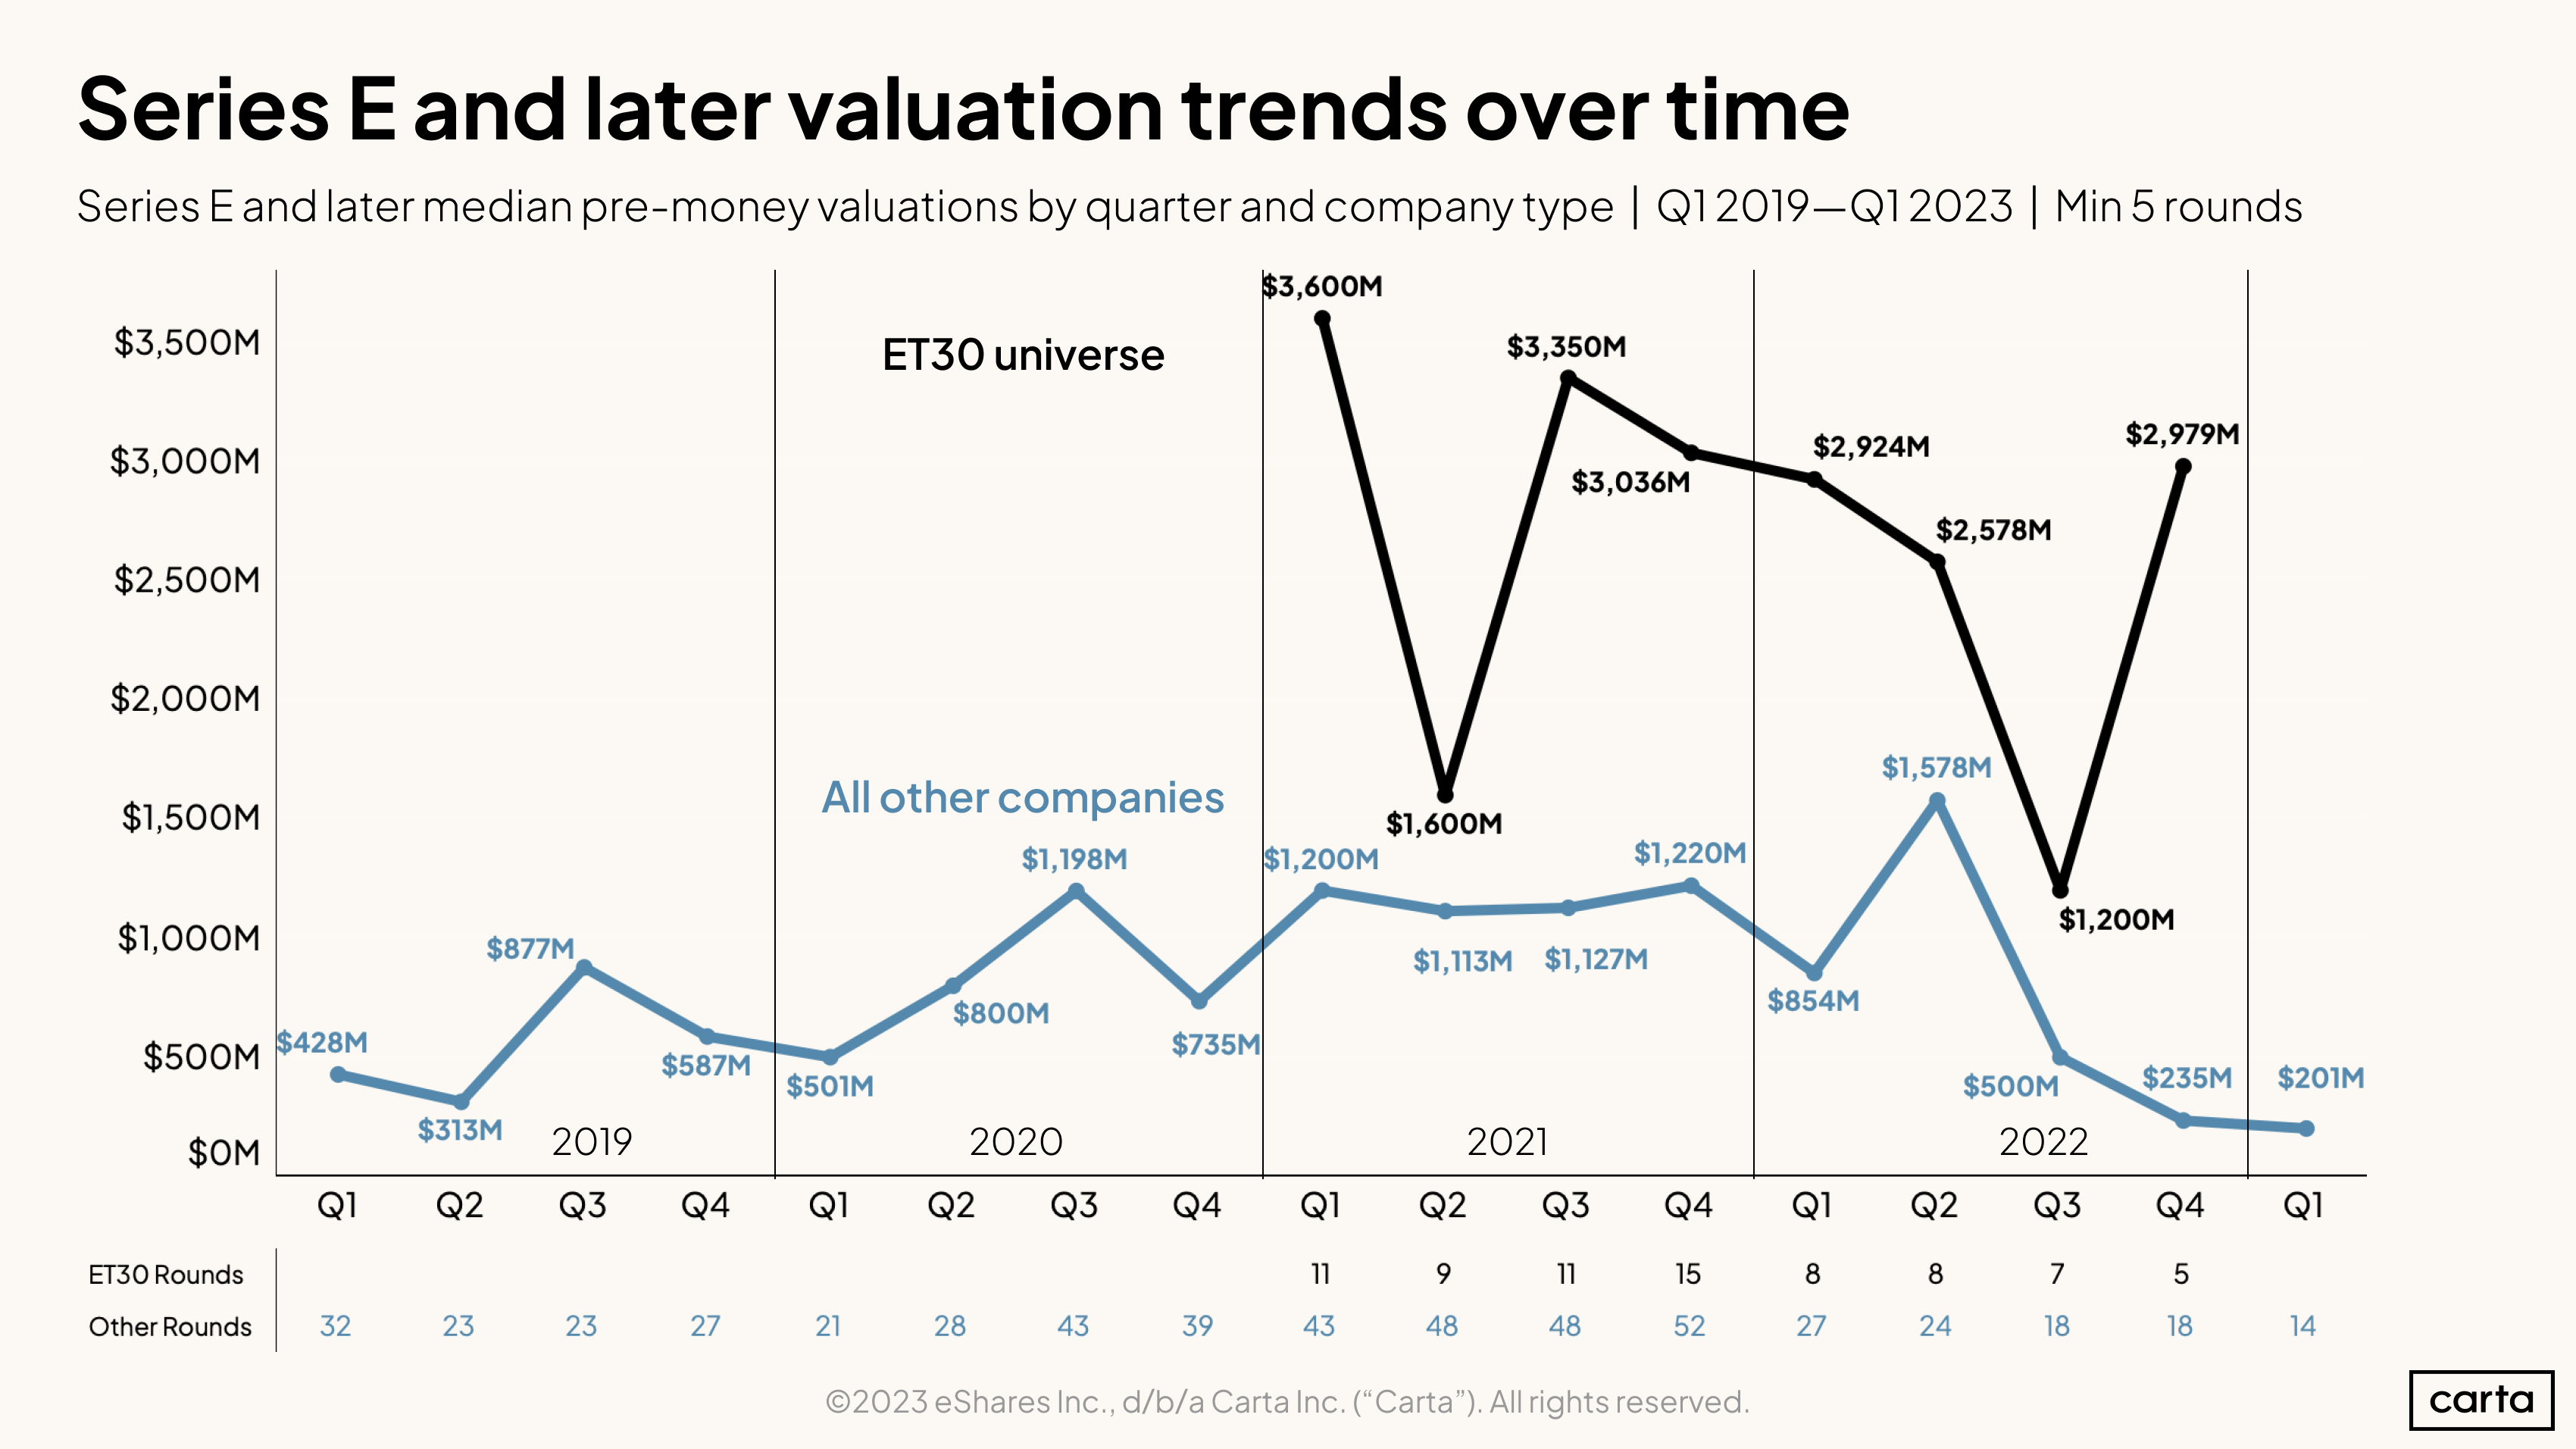 Series E and later median pre-money valuations by quarter and company type Q1 2019-Q1 2023